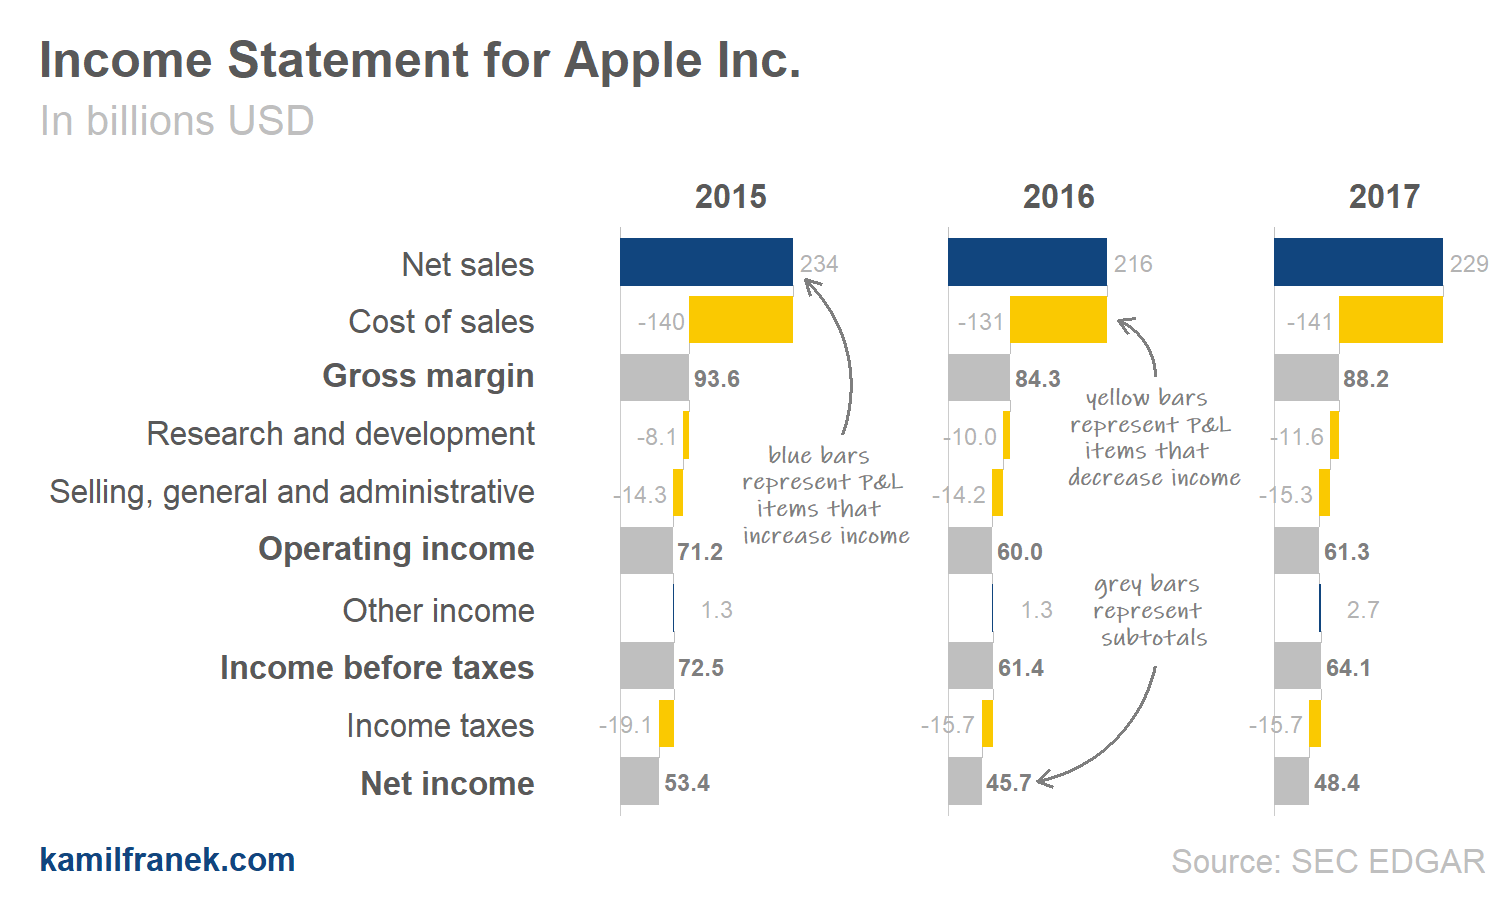 Raw Waterfall Income Statement Visualization for Apple Inc.